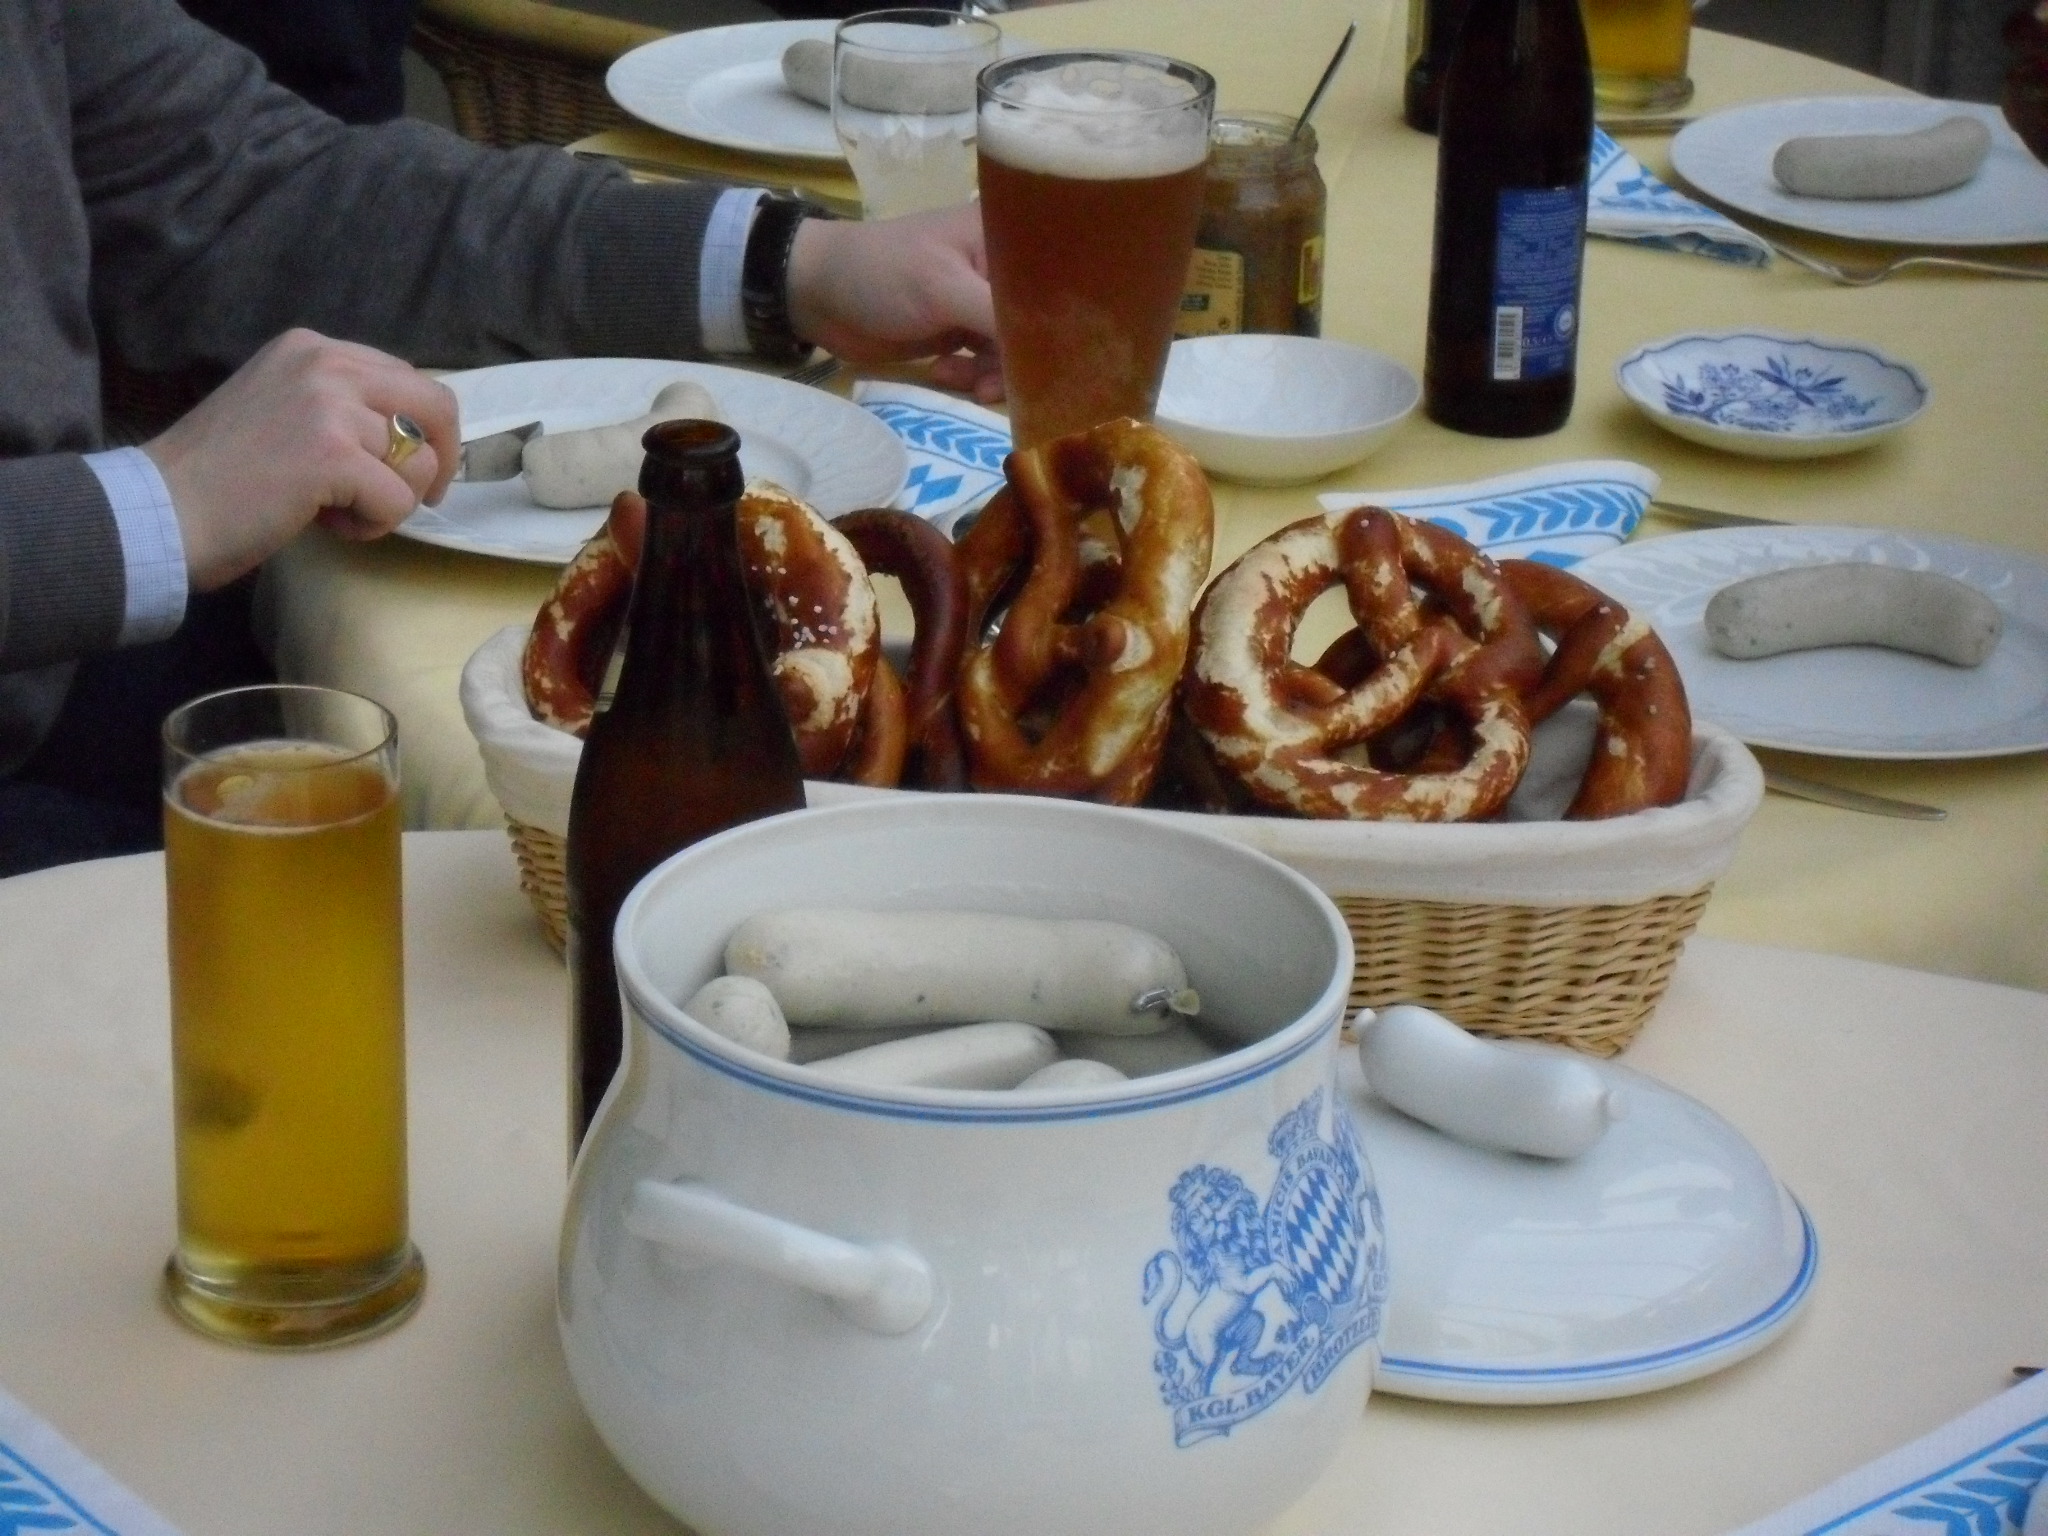 people sitting at a table with plates and glasses of beer